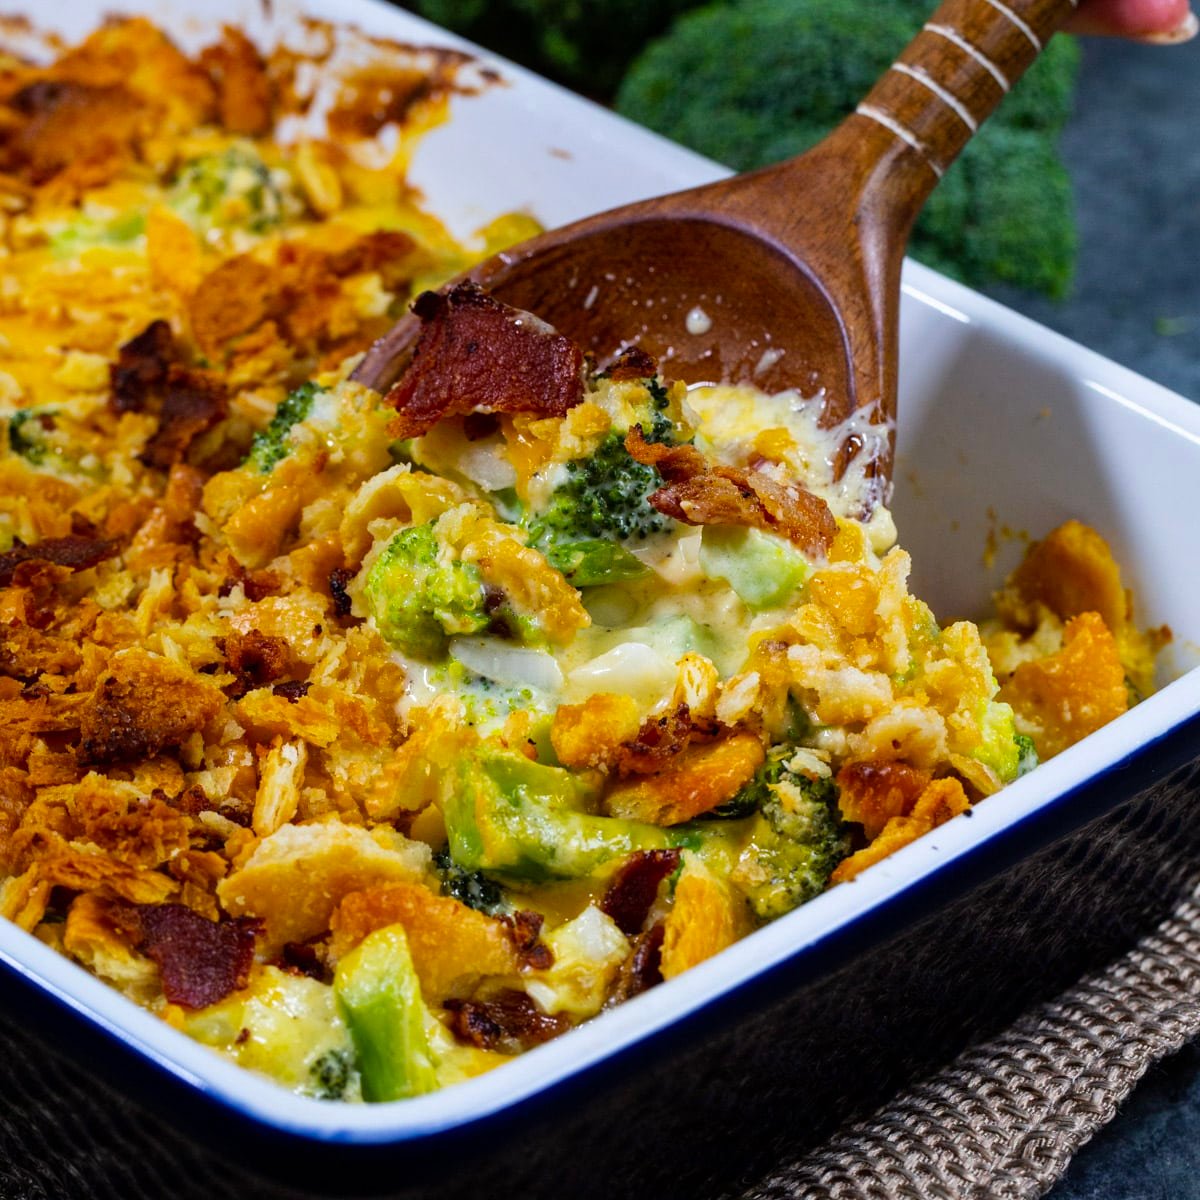 Spoon scooping Loaded Broccoli Casserole out of baking dish.